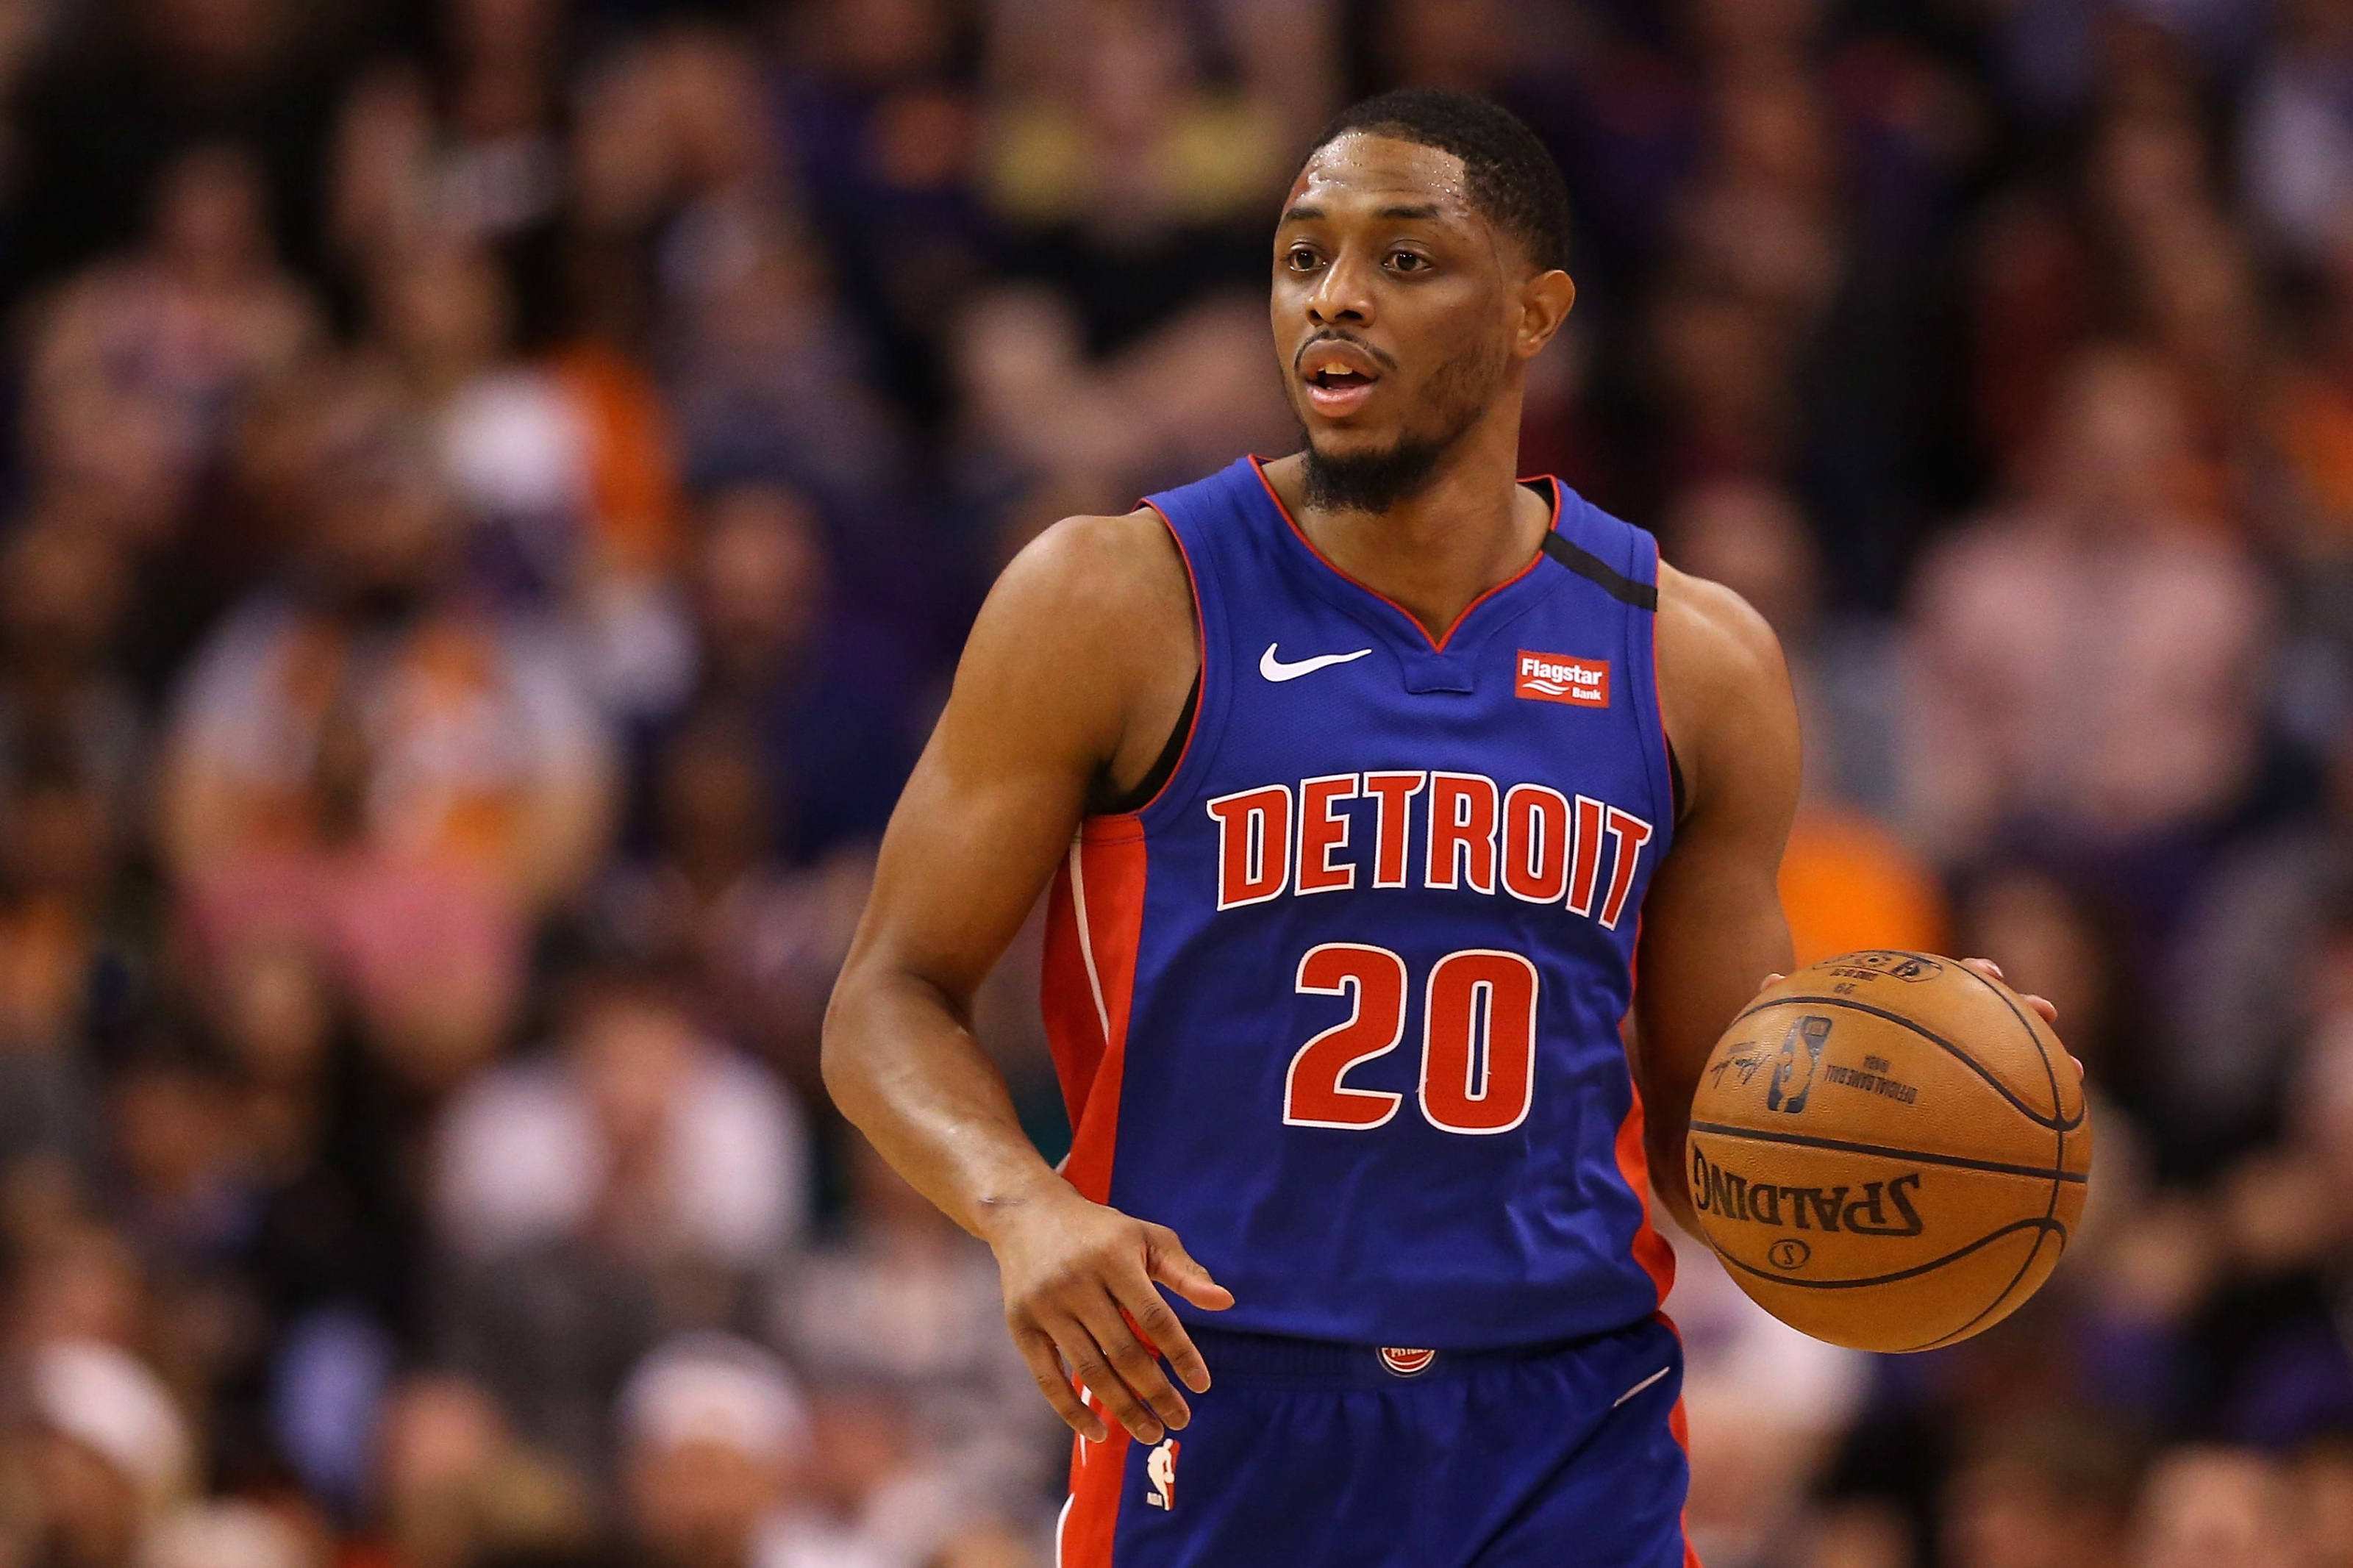 Detroit Pistons: The 2011 NBA Draft still hurts a decade later